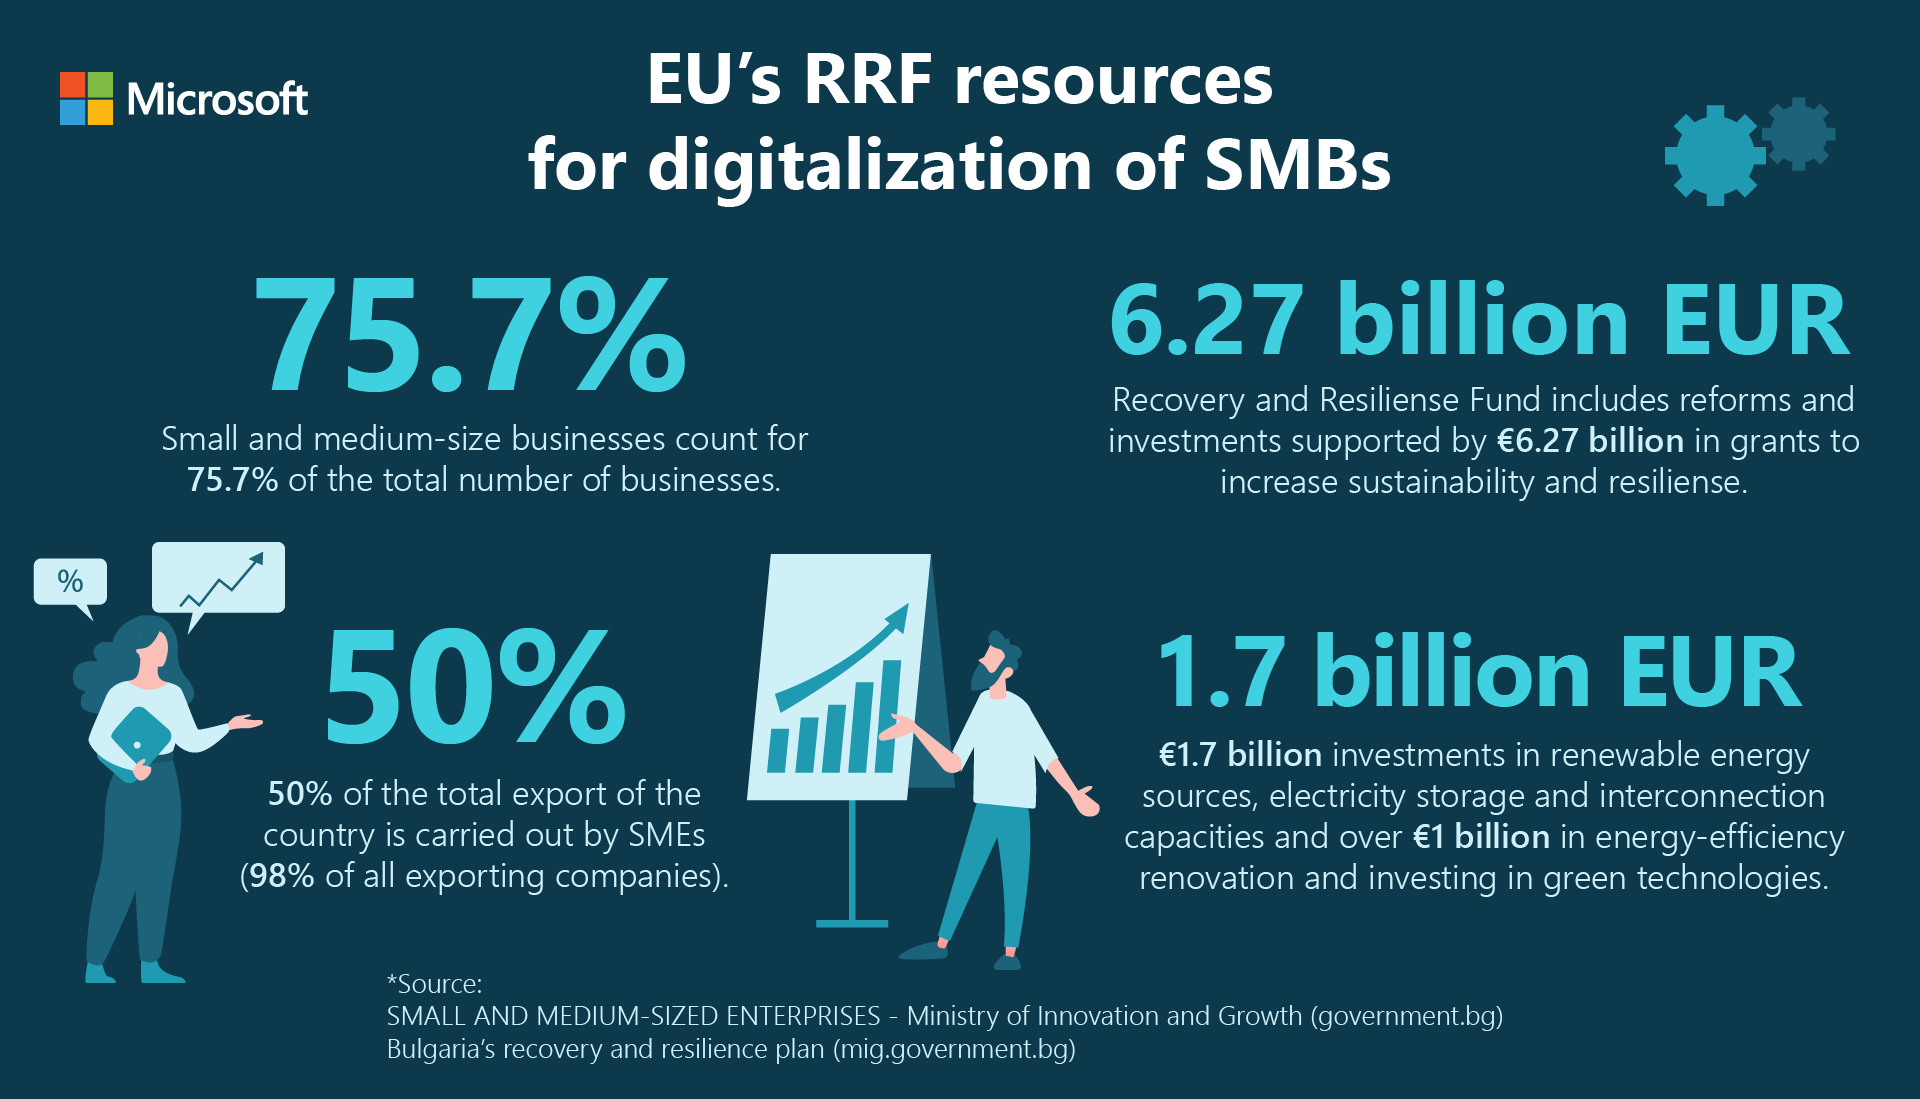 Small and medium enterprises can digitalize using resources from EU’s Recovery and Resilience plan to increase its competitiveness